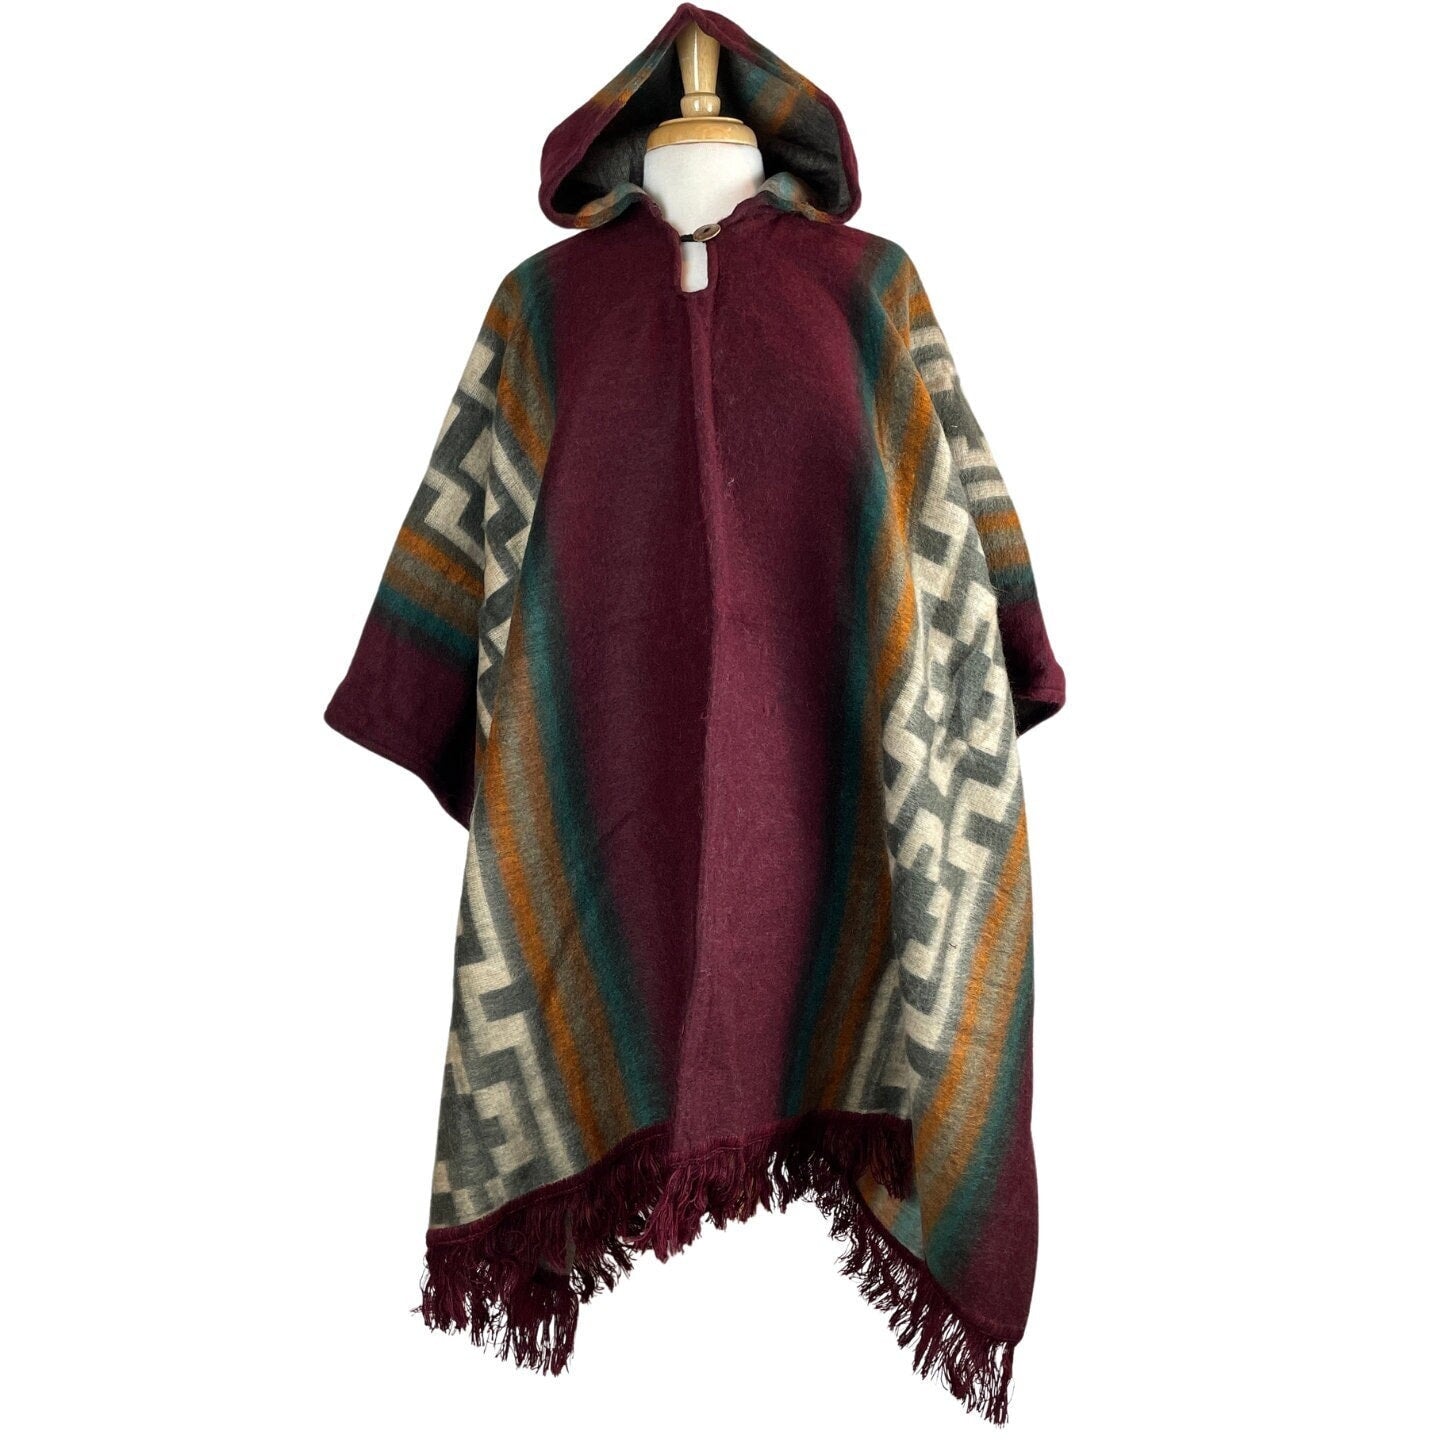 Warm Hooded Poncho for Women and Men | Burgundy Teal